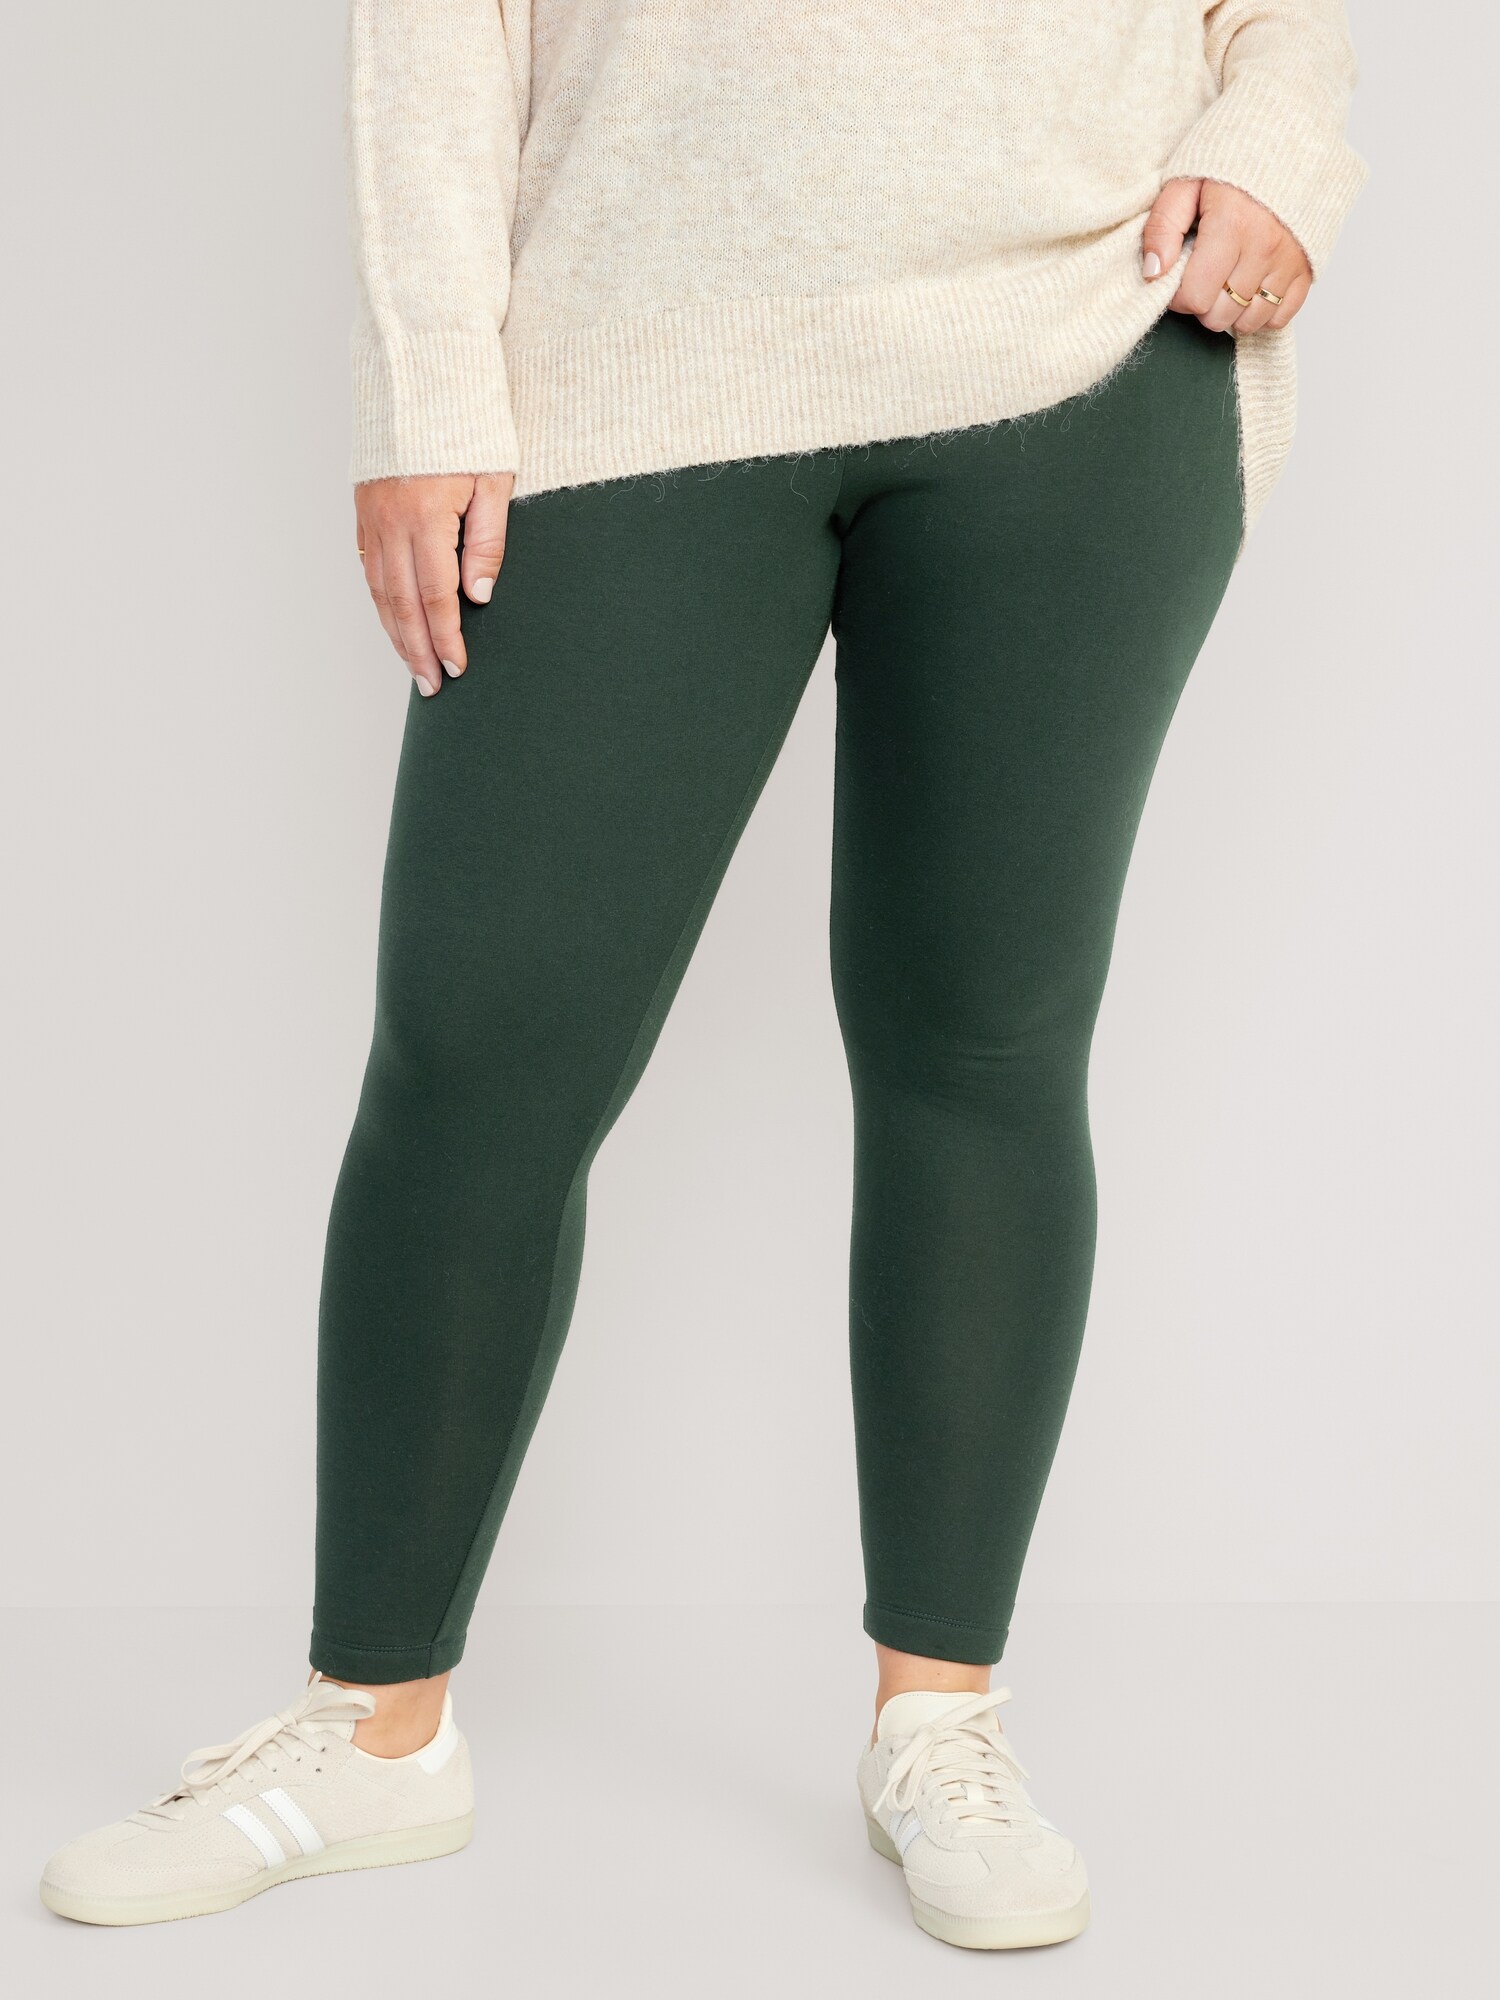 Plus Size Full Length Leggings Featuring High Rise Waistband. (6 Pack) •  Elasticized High Rise Waistband • Fit like a Glove • Pull On/Off Design •  Soft and Stretchy Content: 92% Cotton,